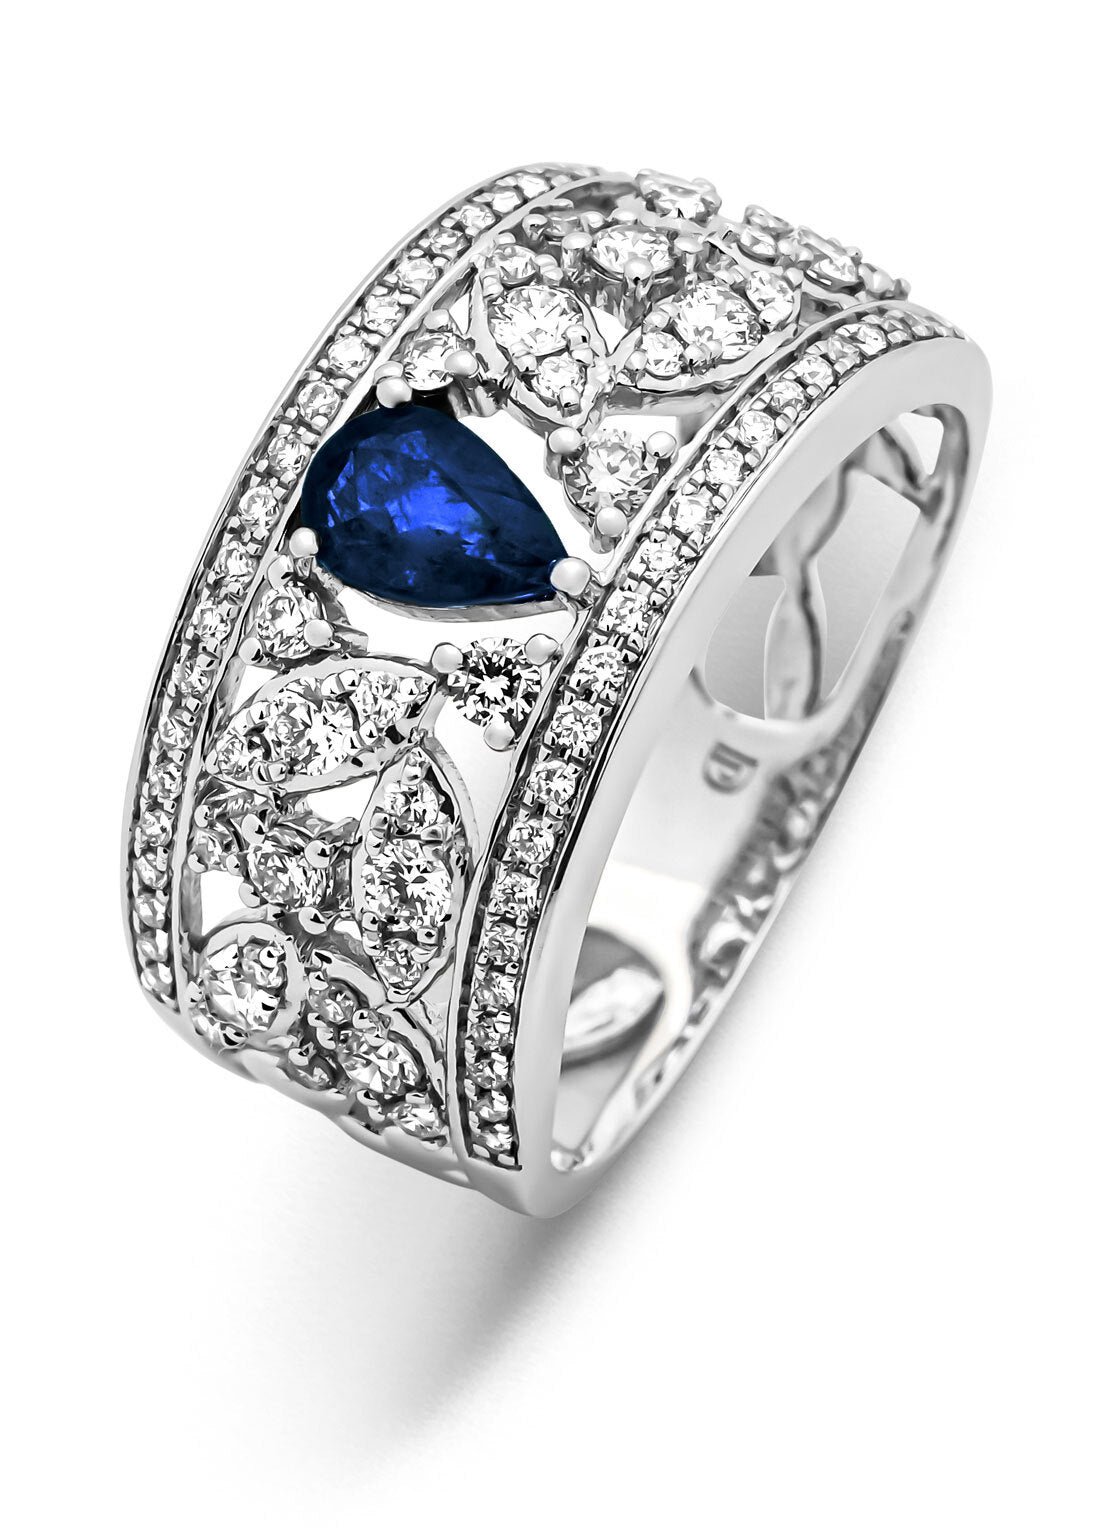 White gold ring, 0.47 CT Blue Sapphire, Majestic